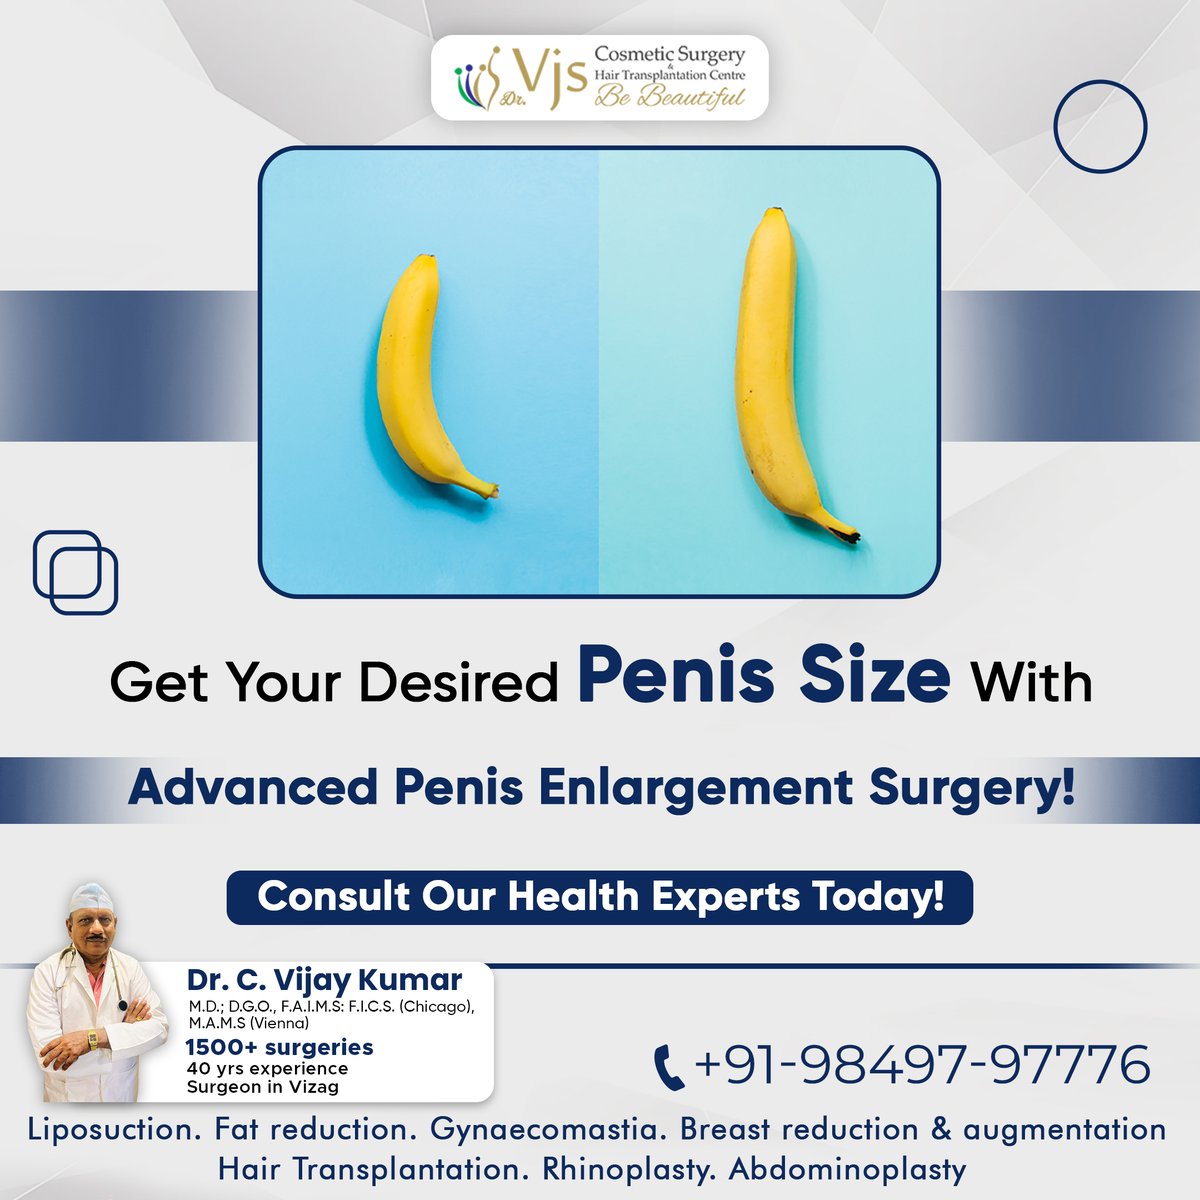 GET YOUR DESIRED PENIS SIZE! WITH
ADVANCED PENIS ENLARGEMENT SURGERY!

CONSULT OUR HEALTH EXPERTS TODAY!
+91-98497-97776
🌐vjclinics.com

#penisenlargement #maleenhancement #penileaugmentation #penisenlargementsurgery #penisincrease #penileimplants #penilegrowth